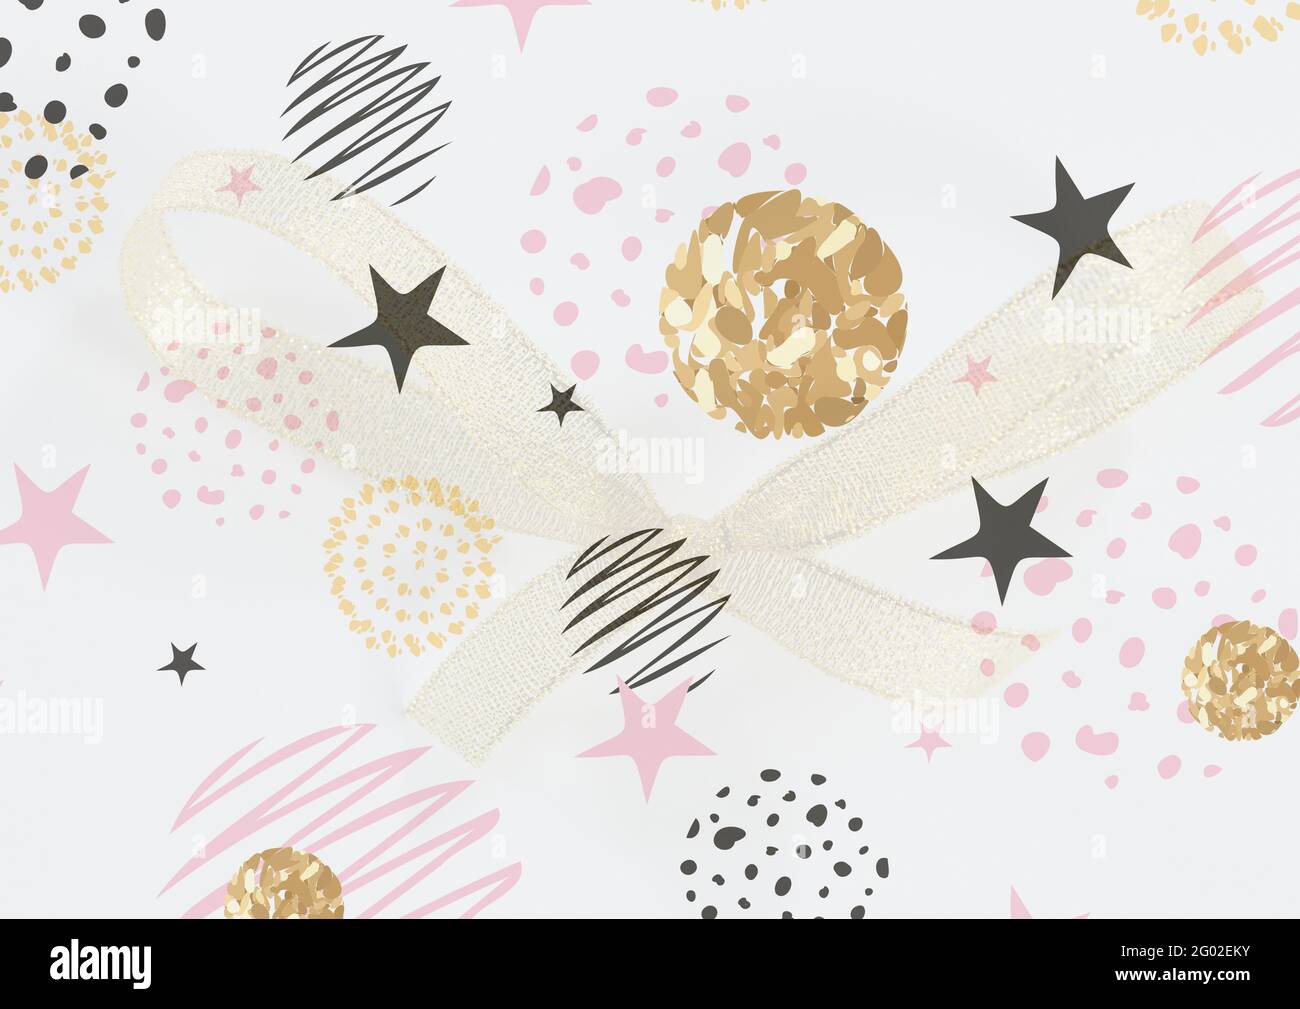 Composition of black stars, gold circles with textural pink and cream elements on white background Stock Photo